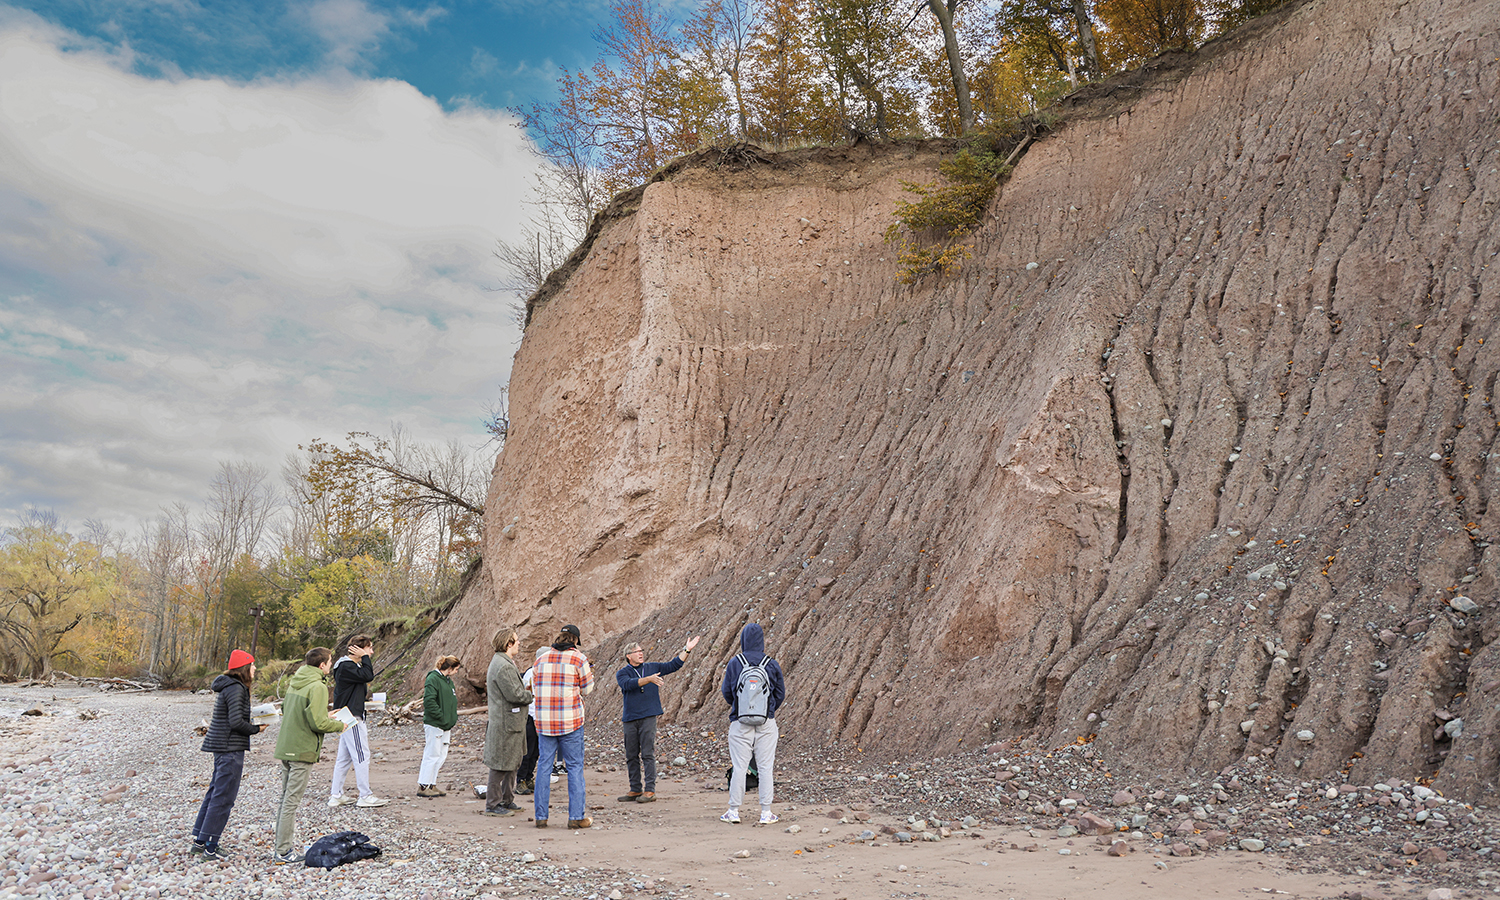 Students in “Introduction to Geology” talk with Associate Professor of Geoscience David Kendrick during a visit to Chimney Bluffs State Park on Lake Ontario.